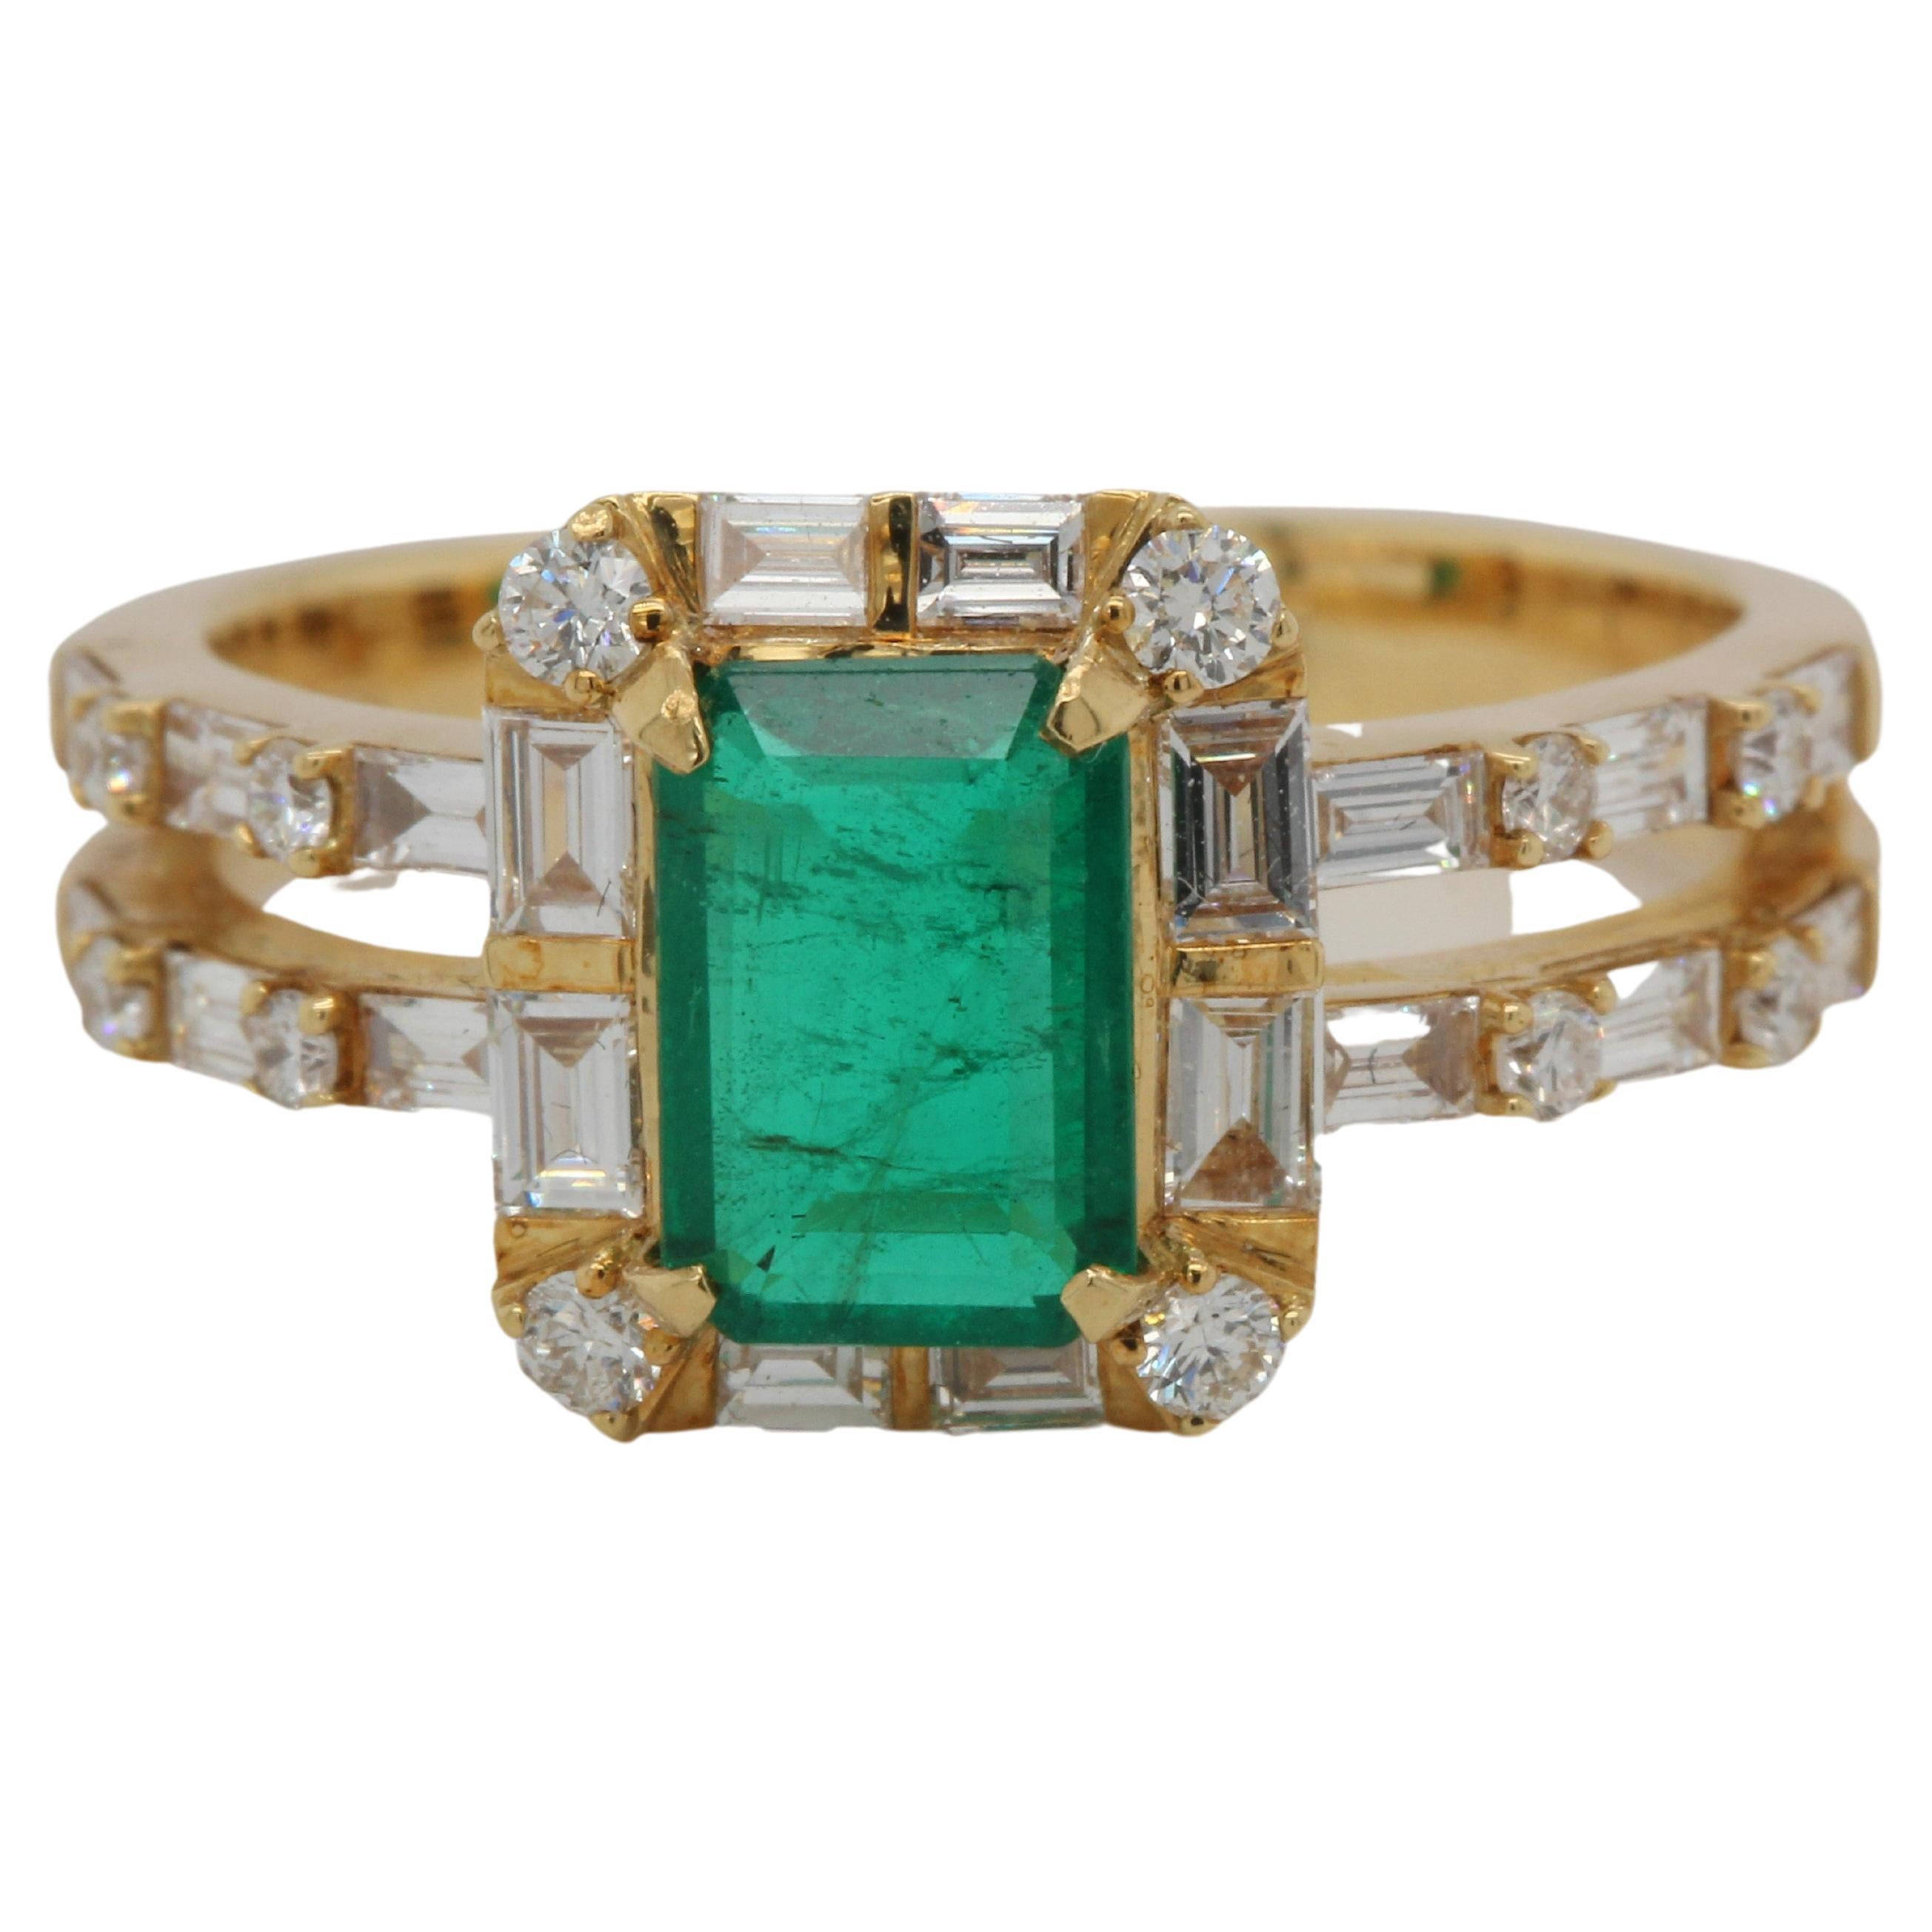 Our impeccable craftsmanship and attention to detail are evident in our refined emerald and diamond ring - a perfect example of our signature style. The 1.04 carat emerald emerald cut center stone is surrounded by 0.56 carat diamonds tapper down